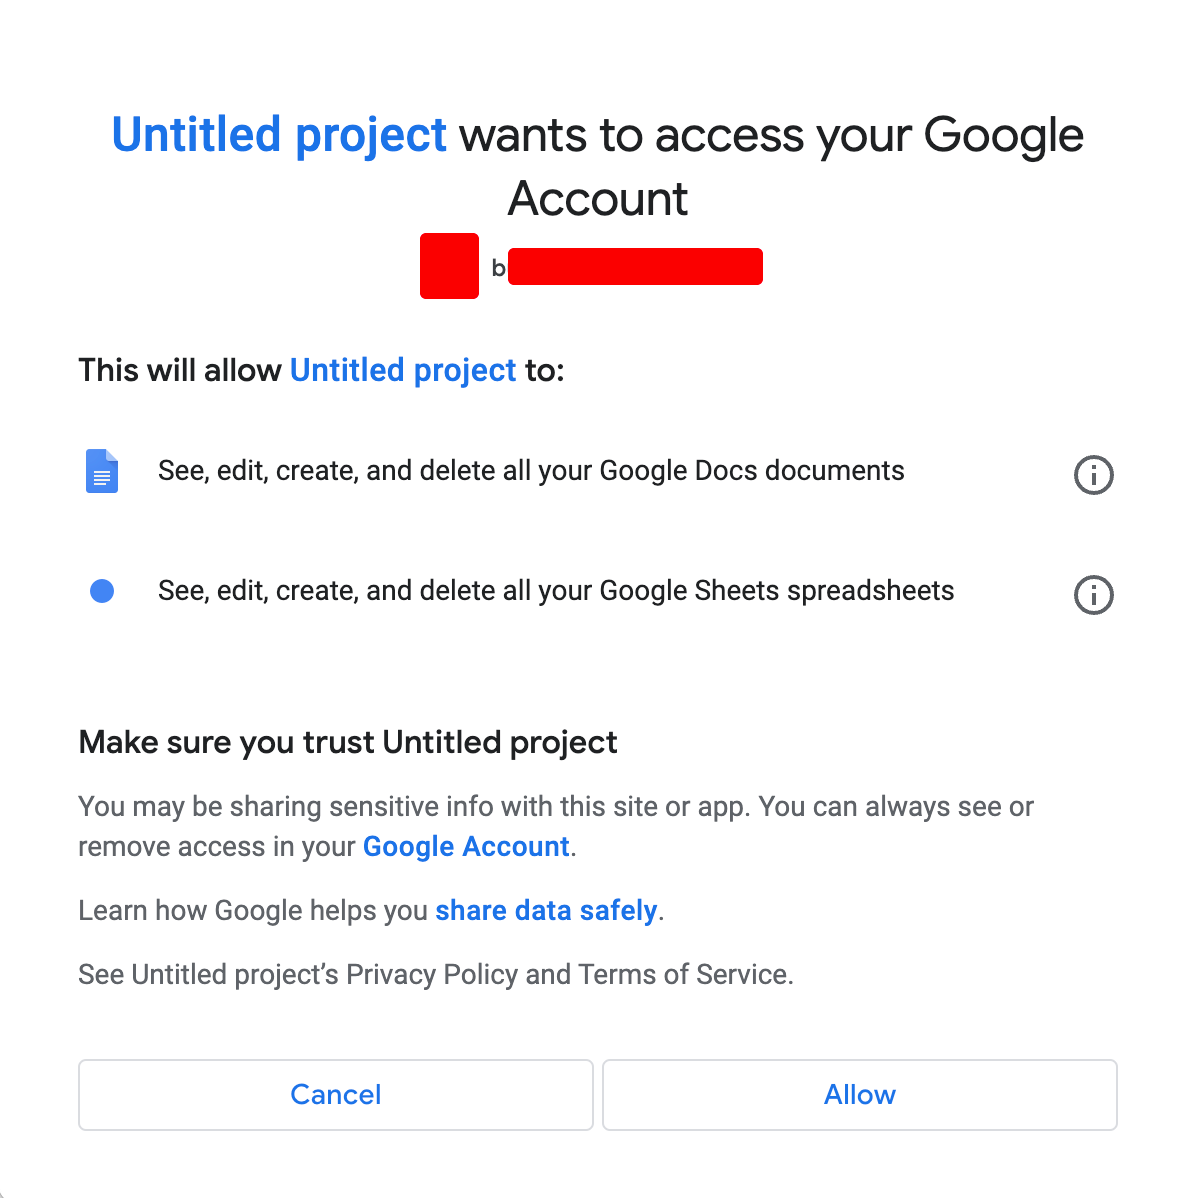 A screenshot of a dialogue “Untitled project wants to access your Google Account”